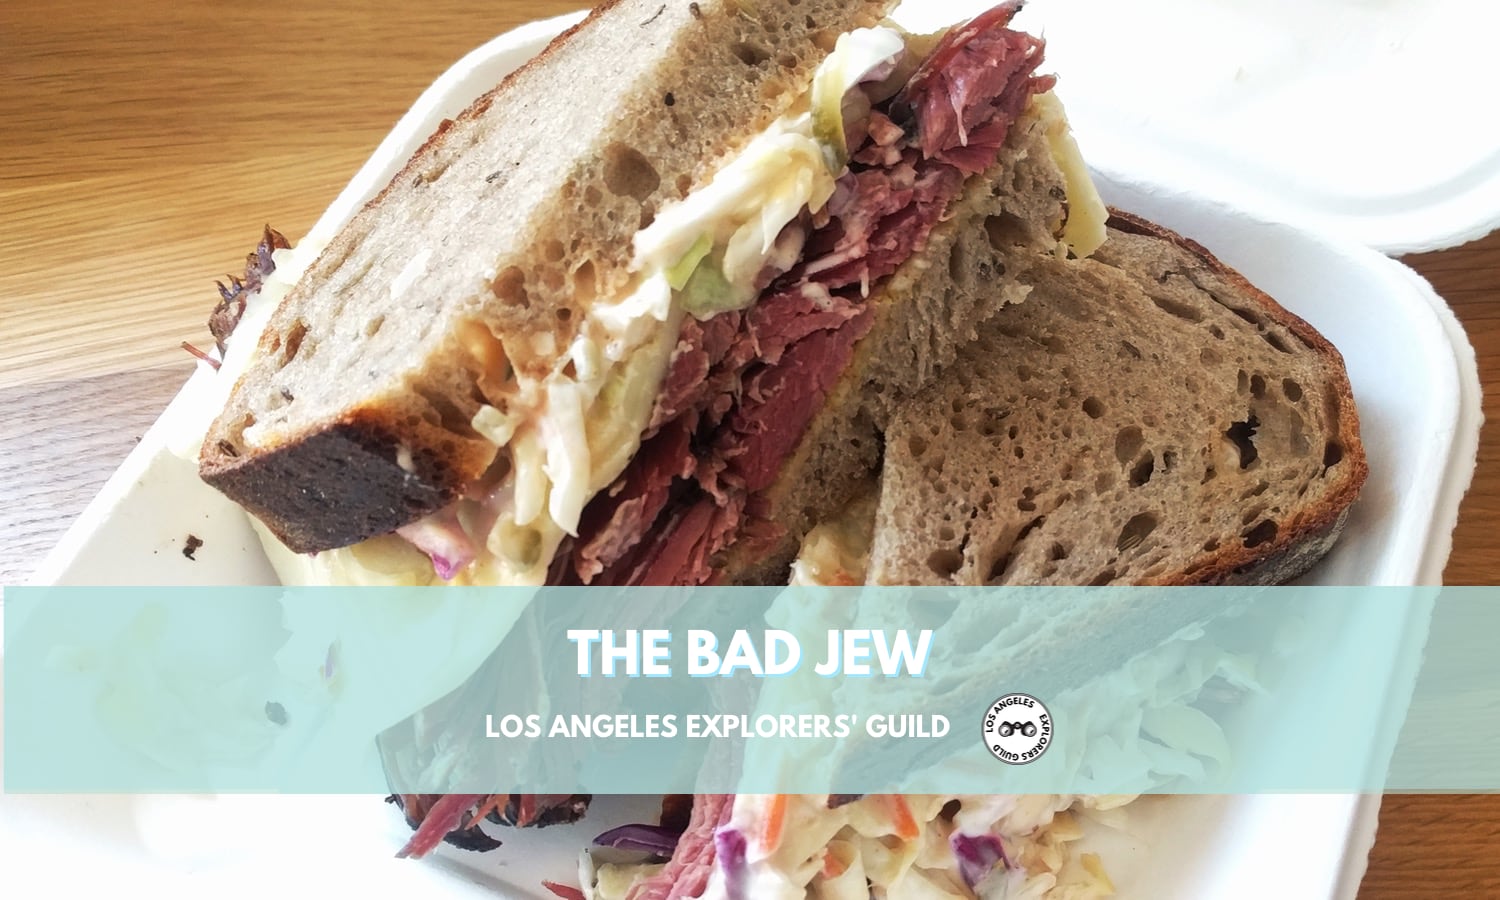 A Visit to the Bad Jew — Los Angeles Explorers Guild